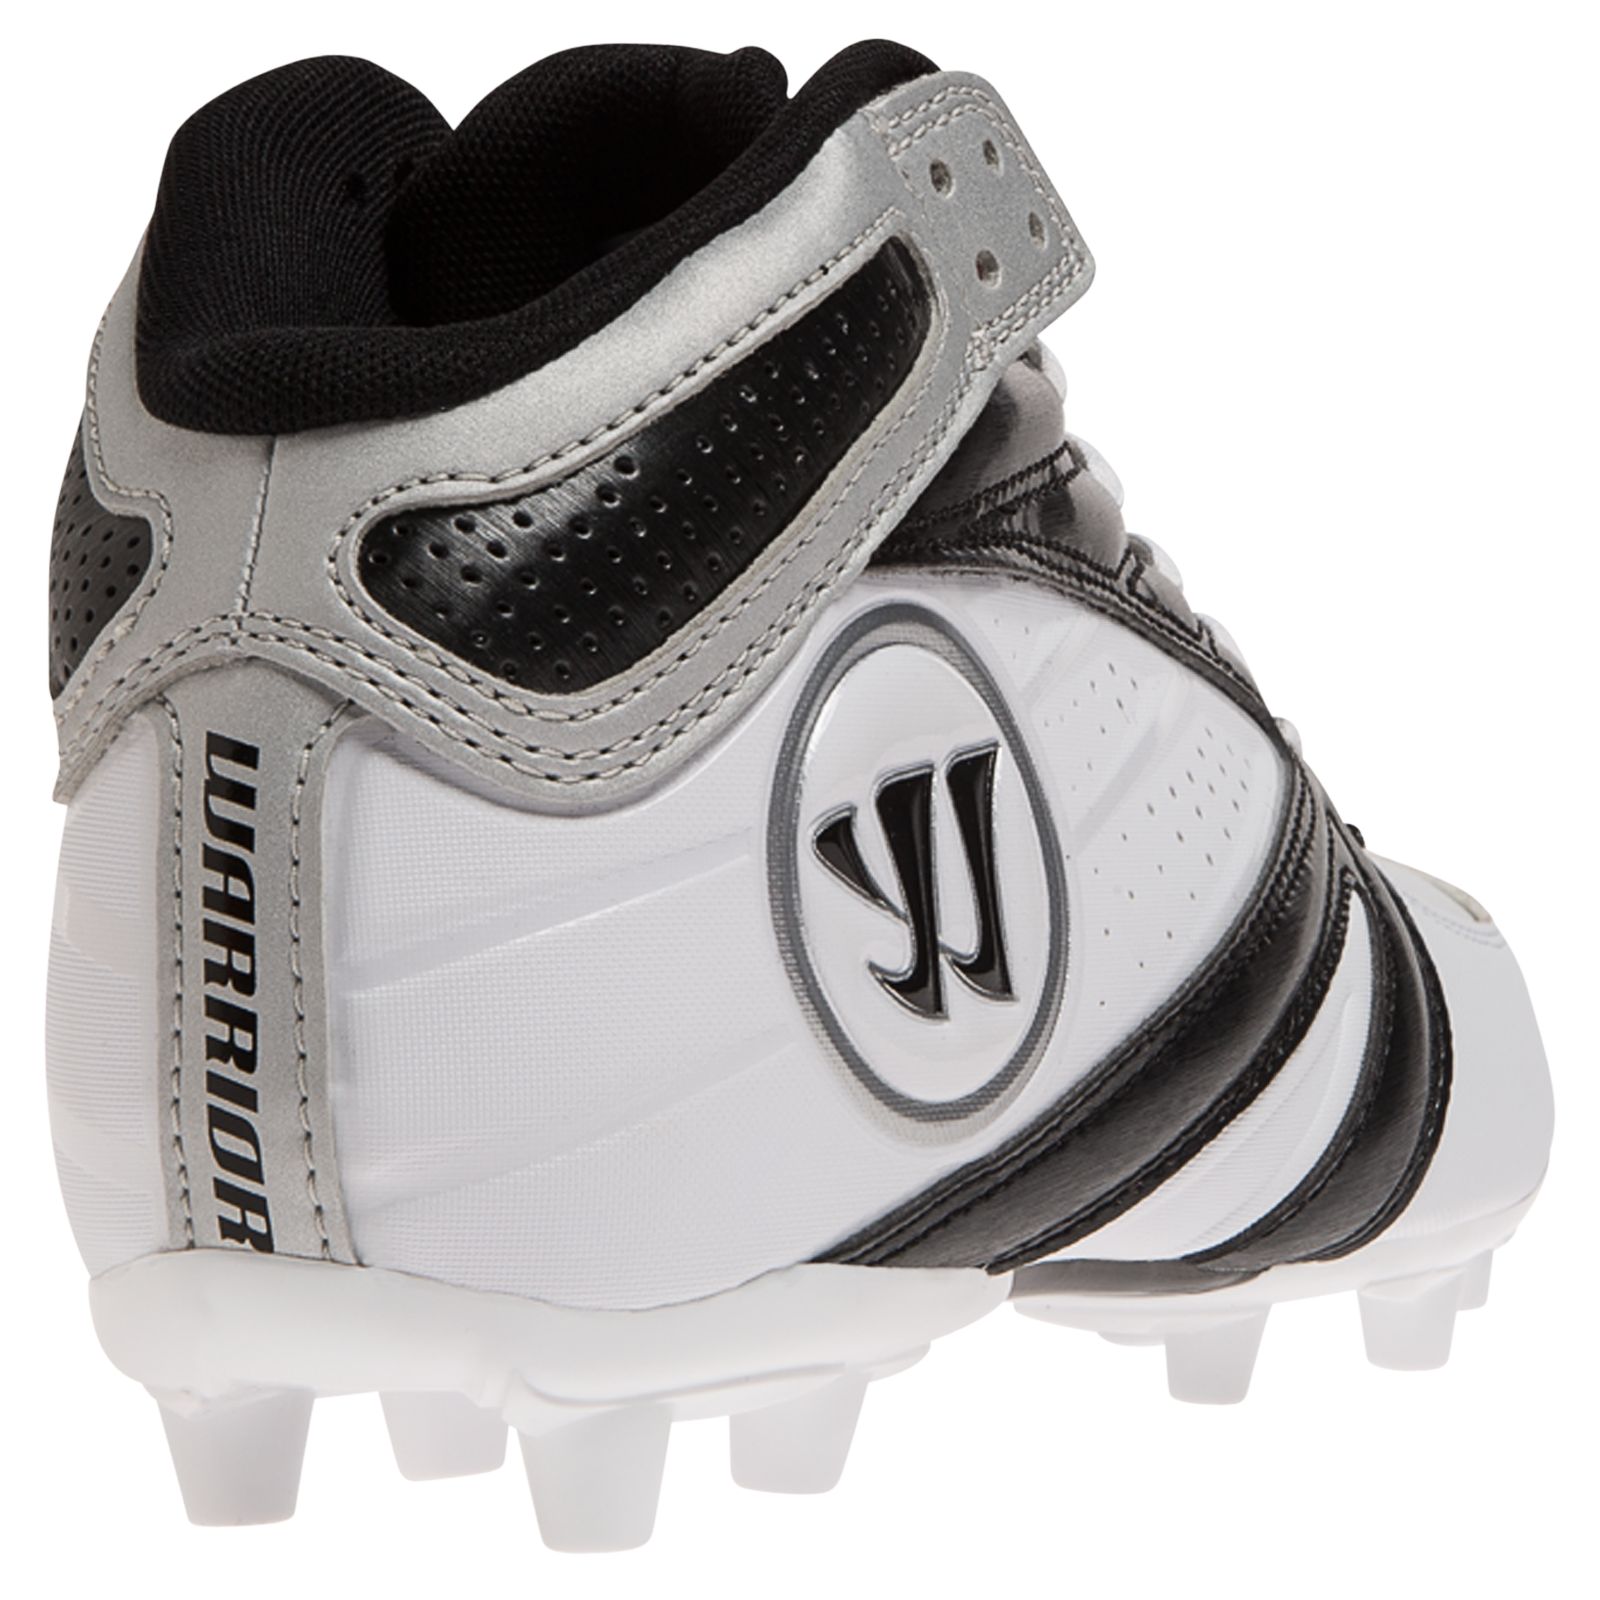 Second Degree 3.0 Cleat, Black image number 2